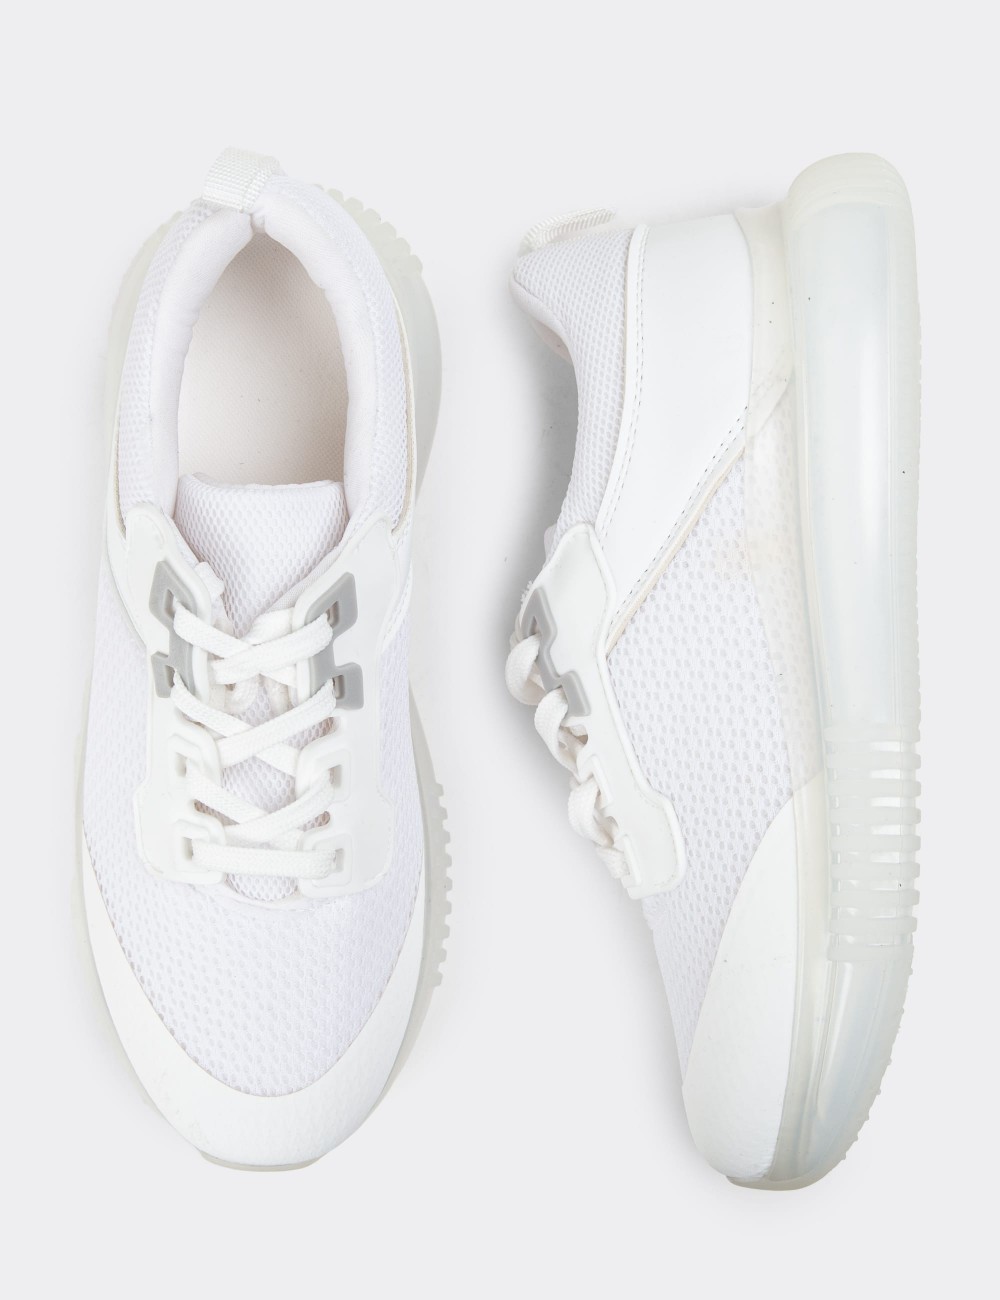 White Sneakers - SP170ZBYZC01